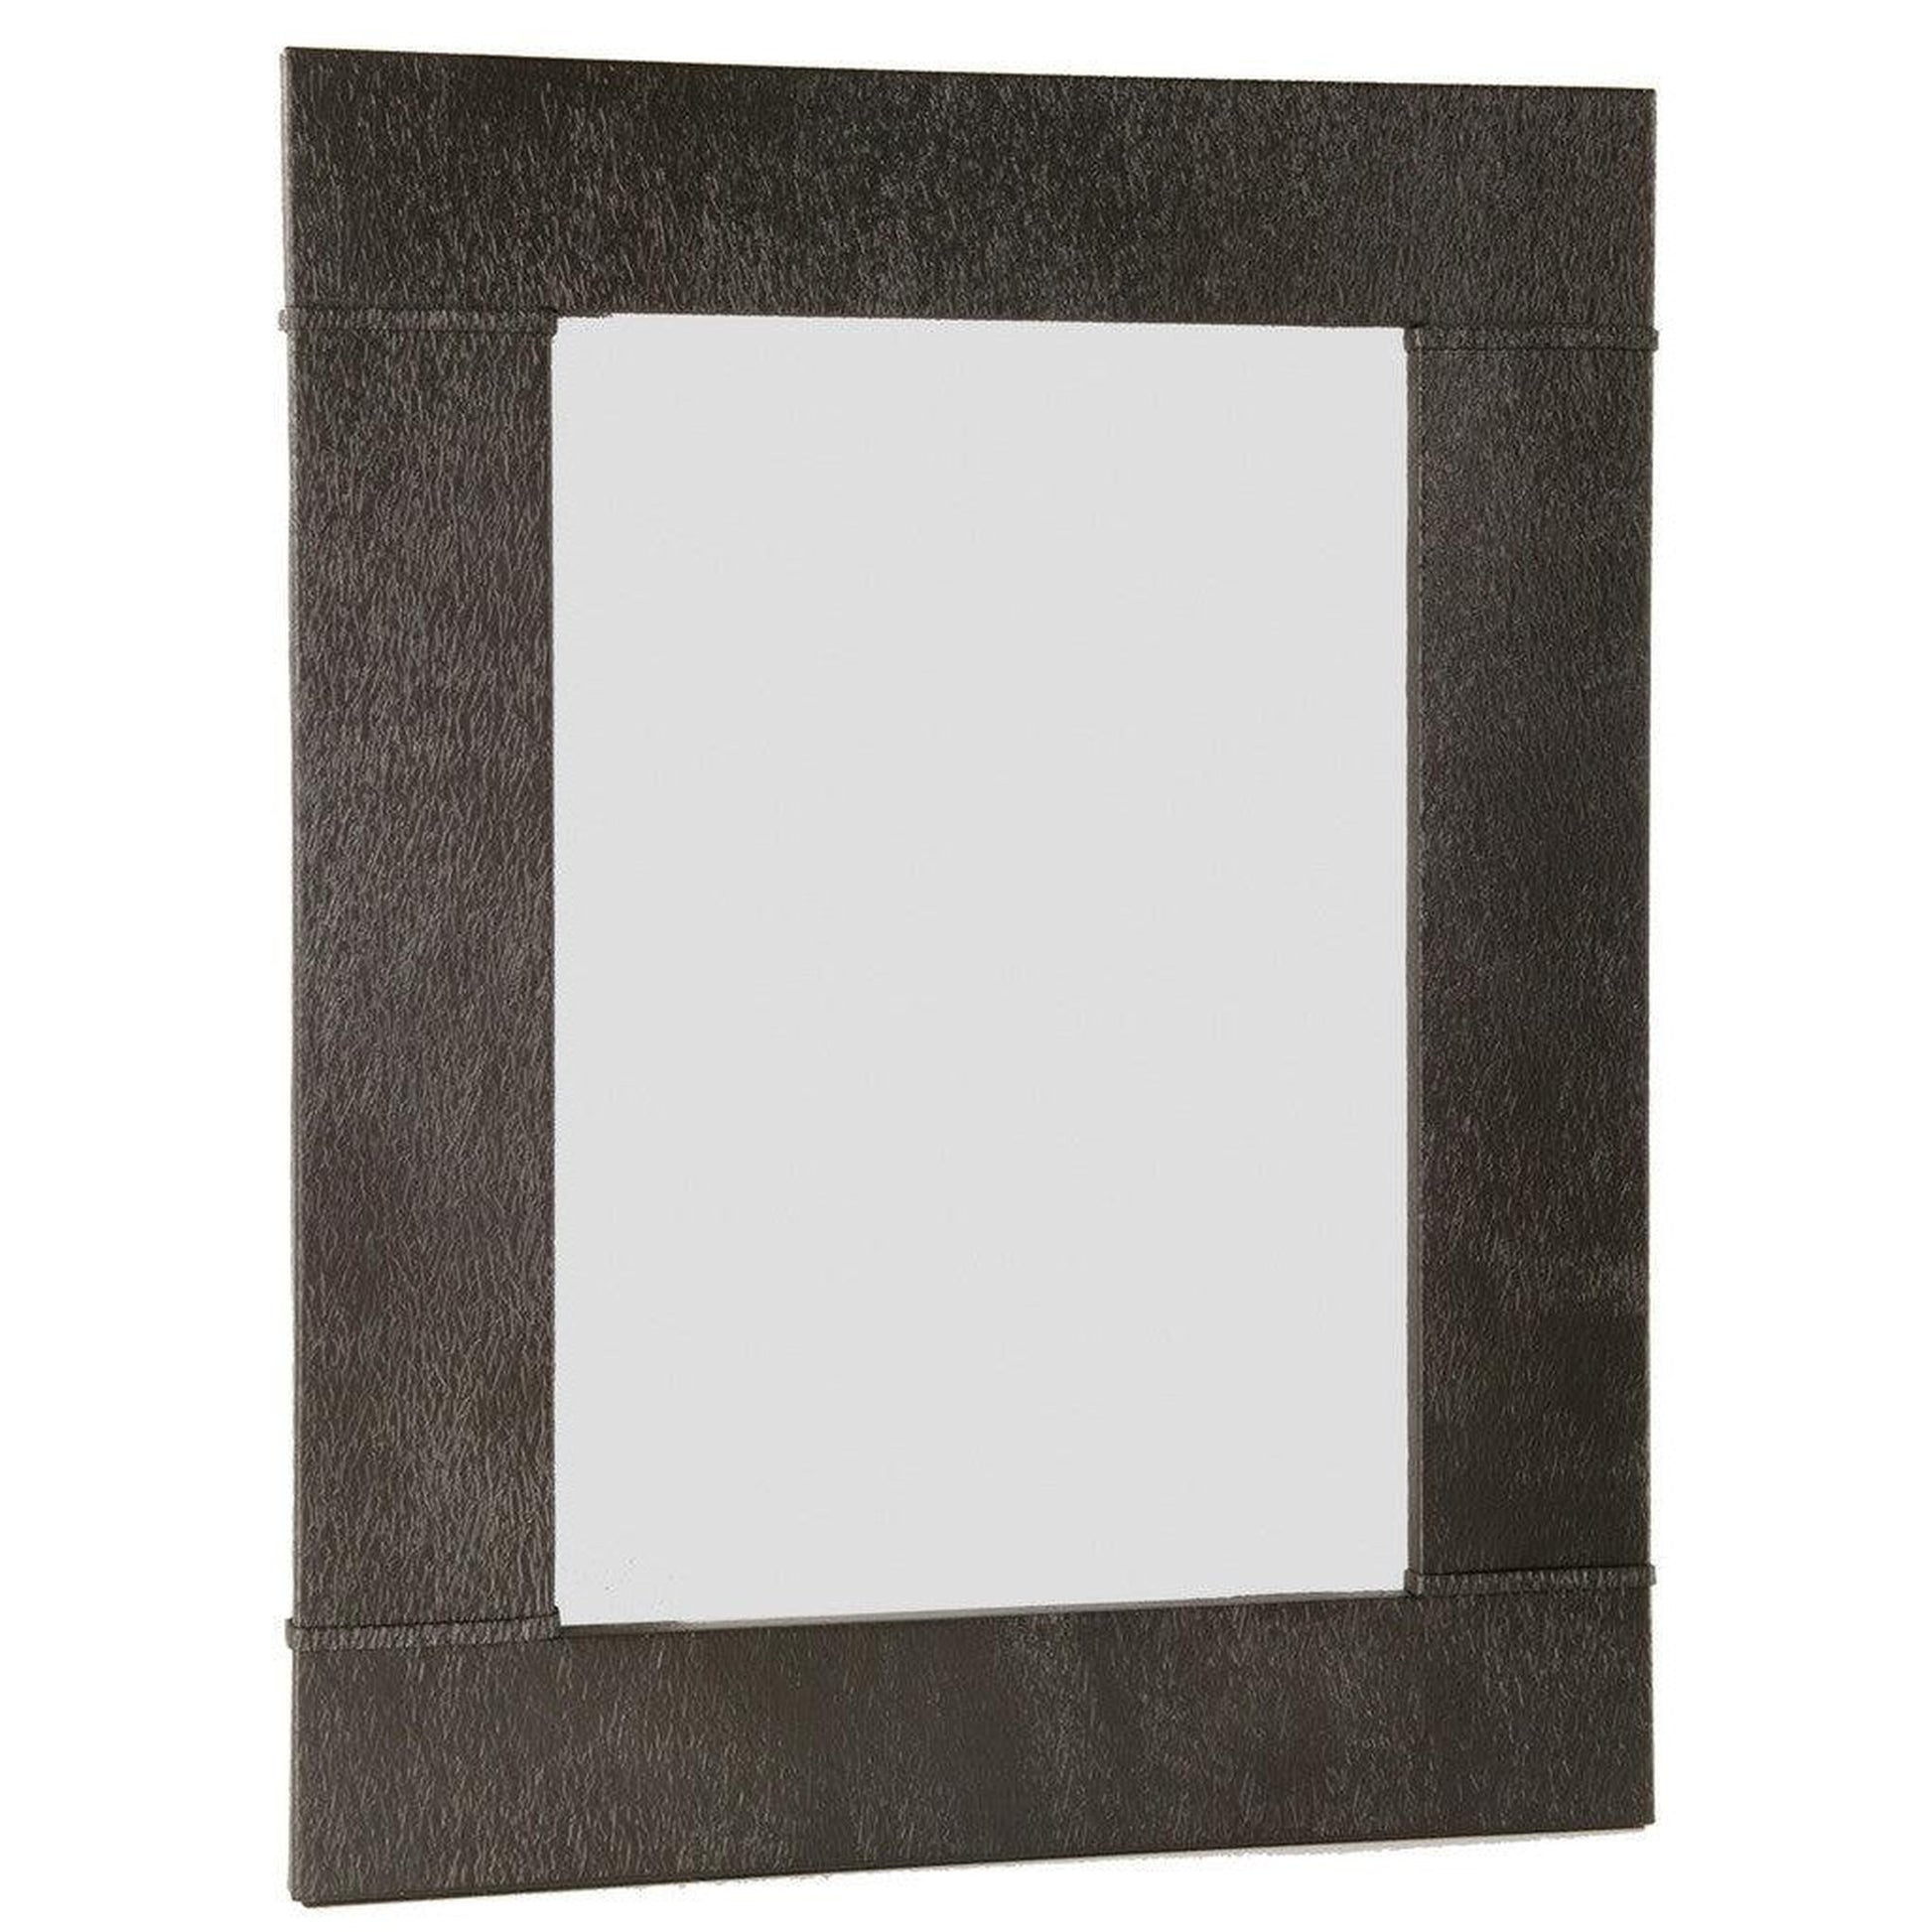 Stone County Ironworks Cedarvale 31" x 35" Small Satin Black Iron Wall Mirror With Pewter Iron Accent